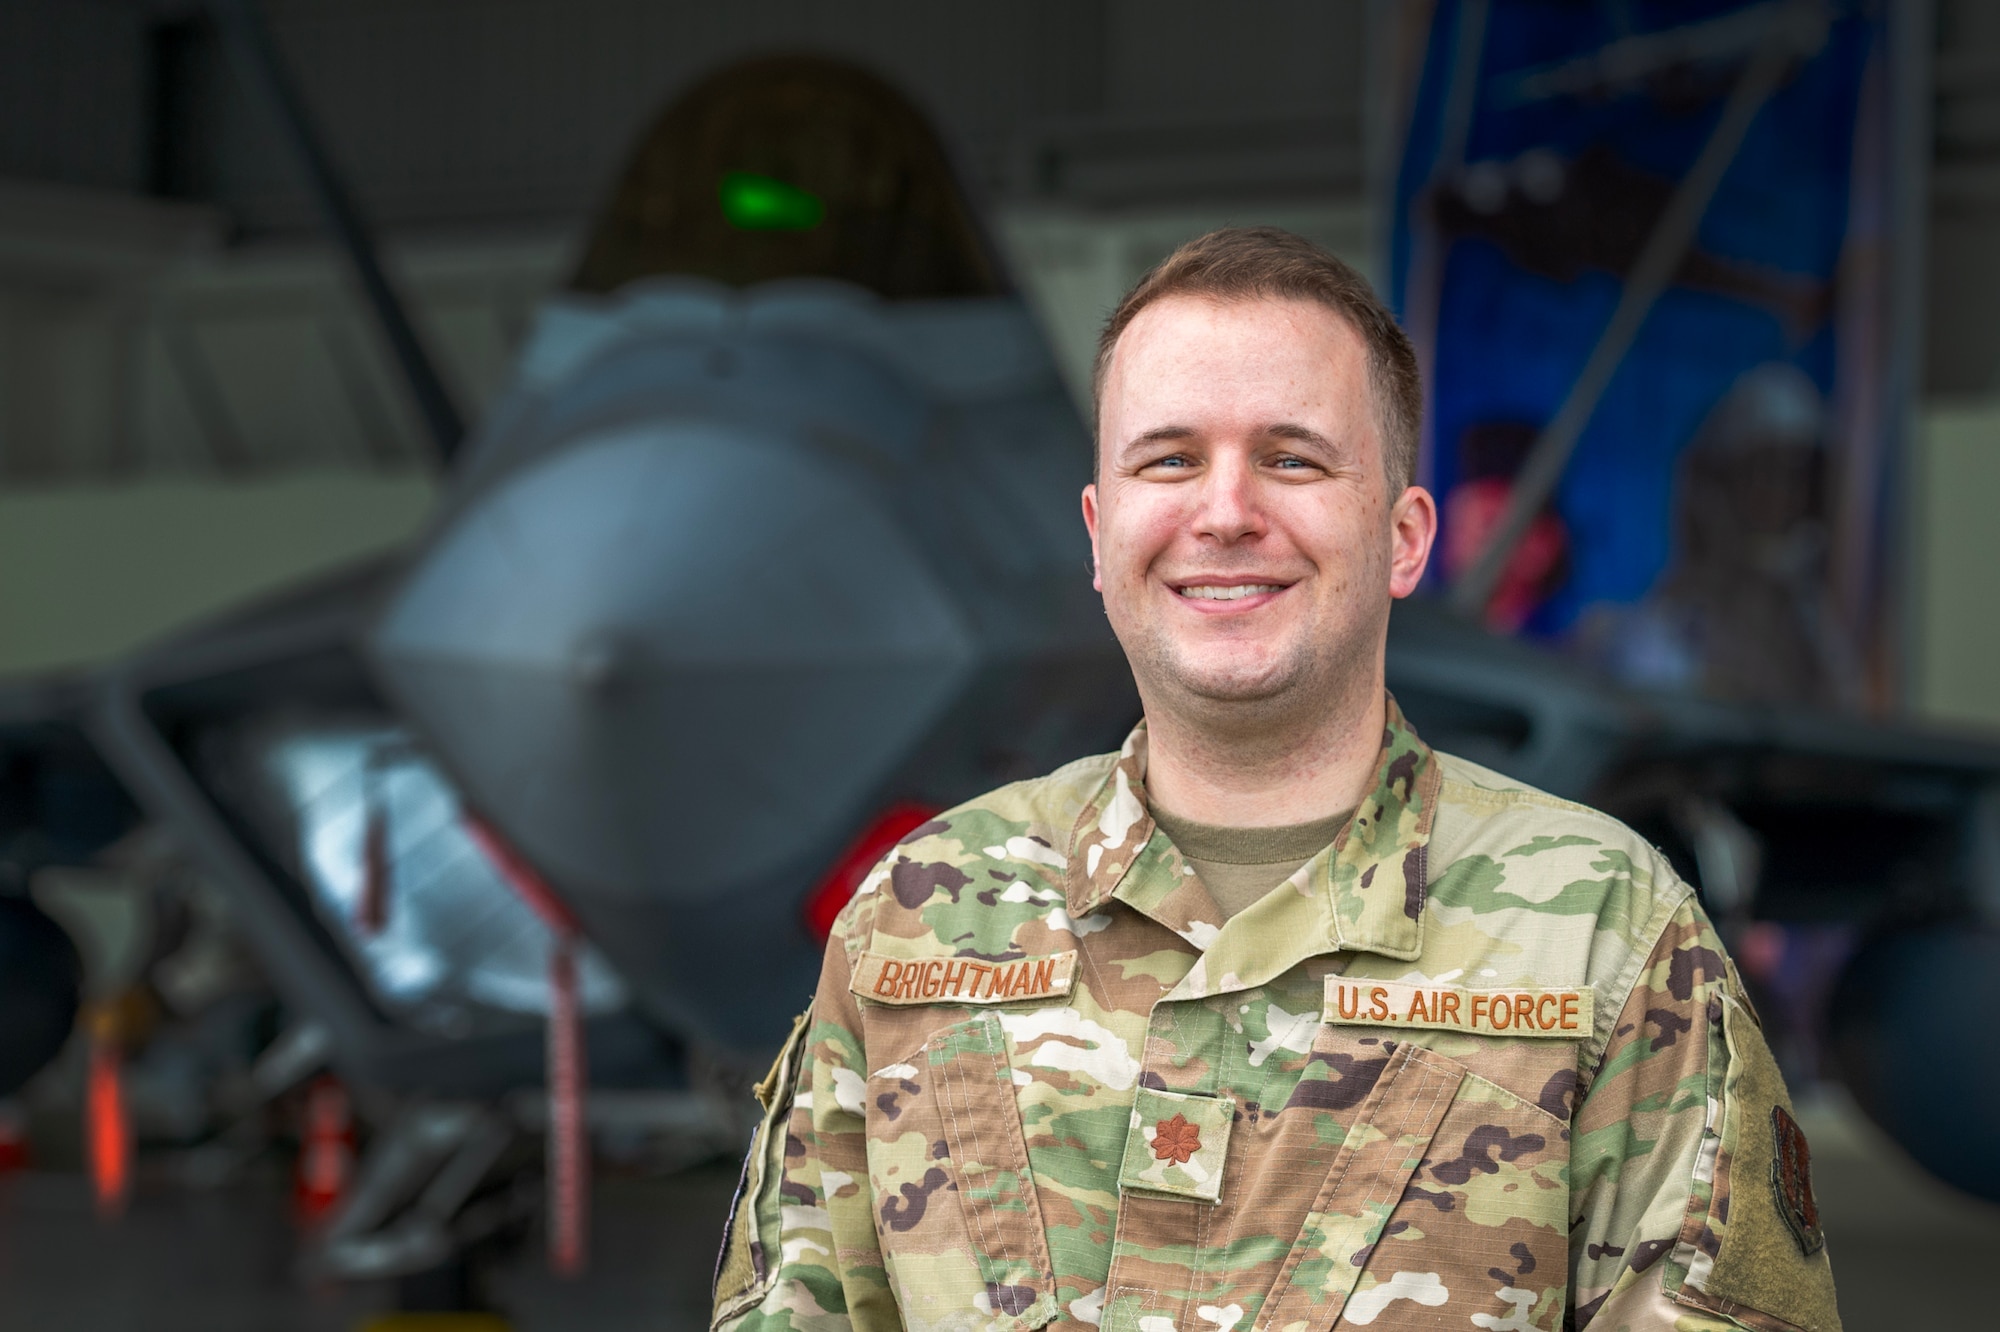 .S. Air Force Maj. Stephen Brightman, Bilateral Affairs Officer, conducts an engagement during exercise Cope Thunder 23-2, Clark Air Base, Philippines Jul 7, 2023.